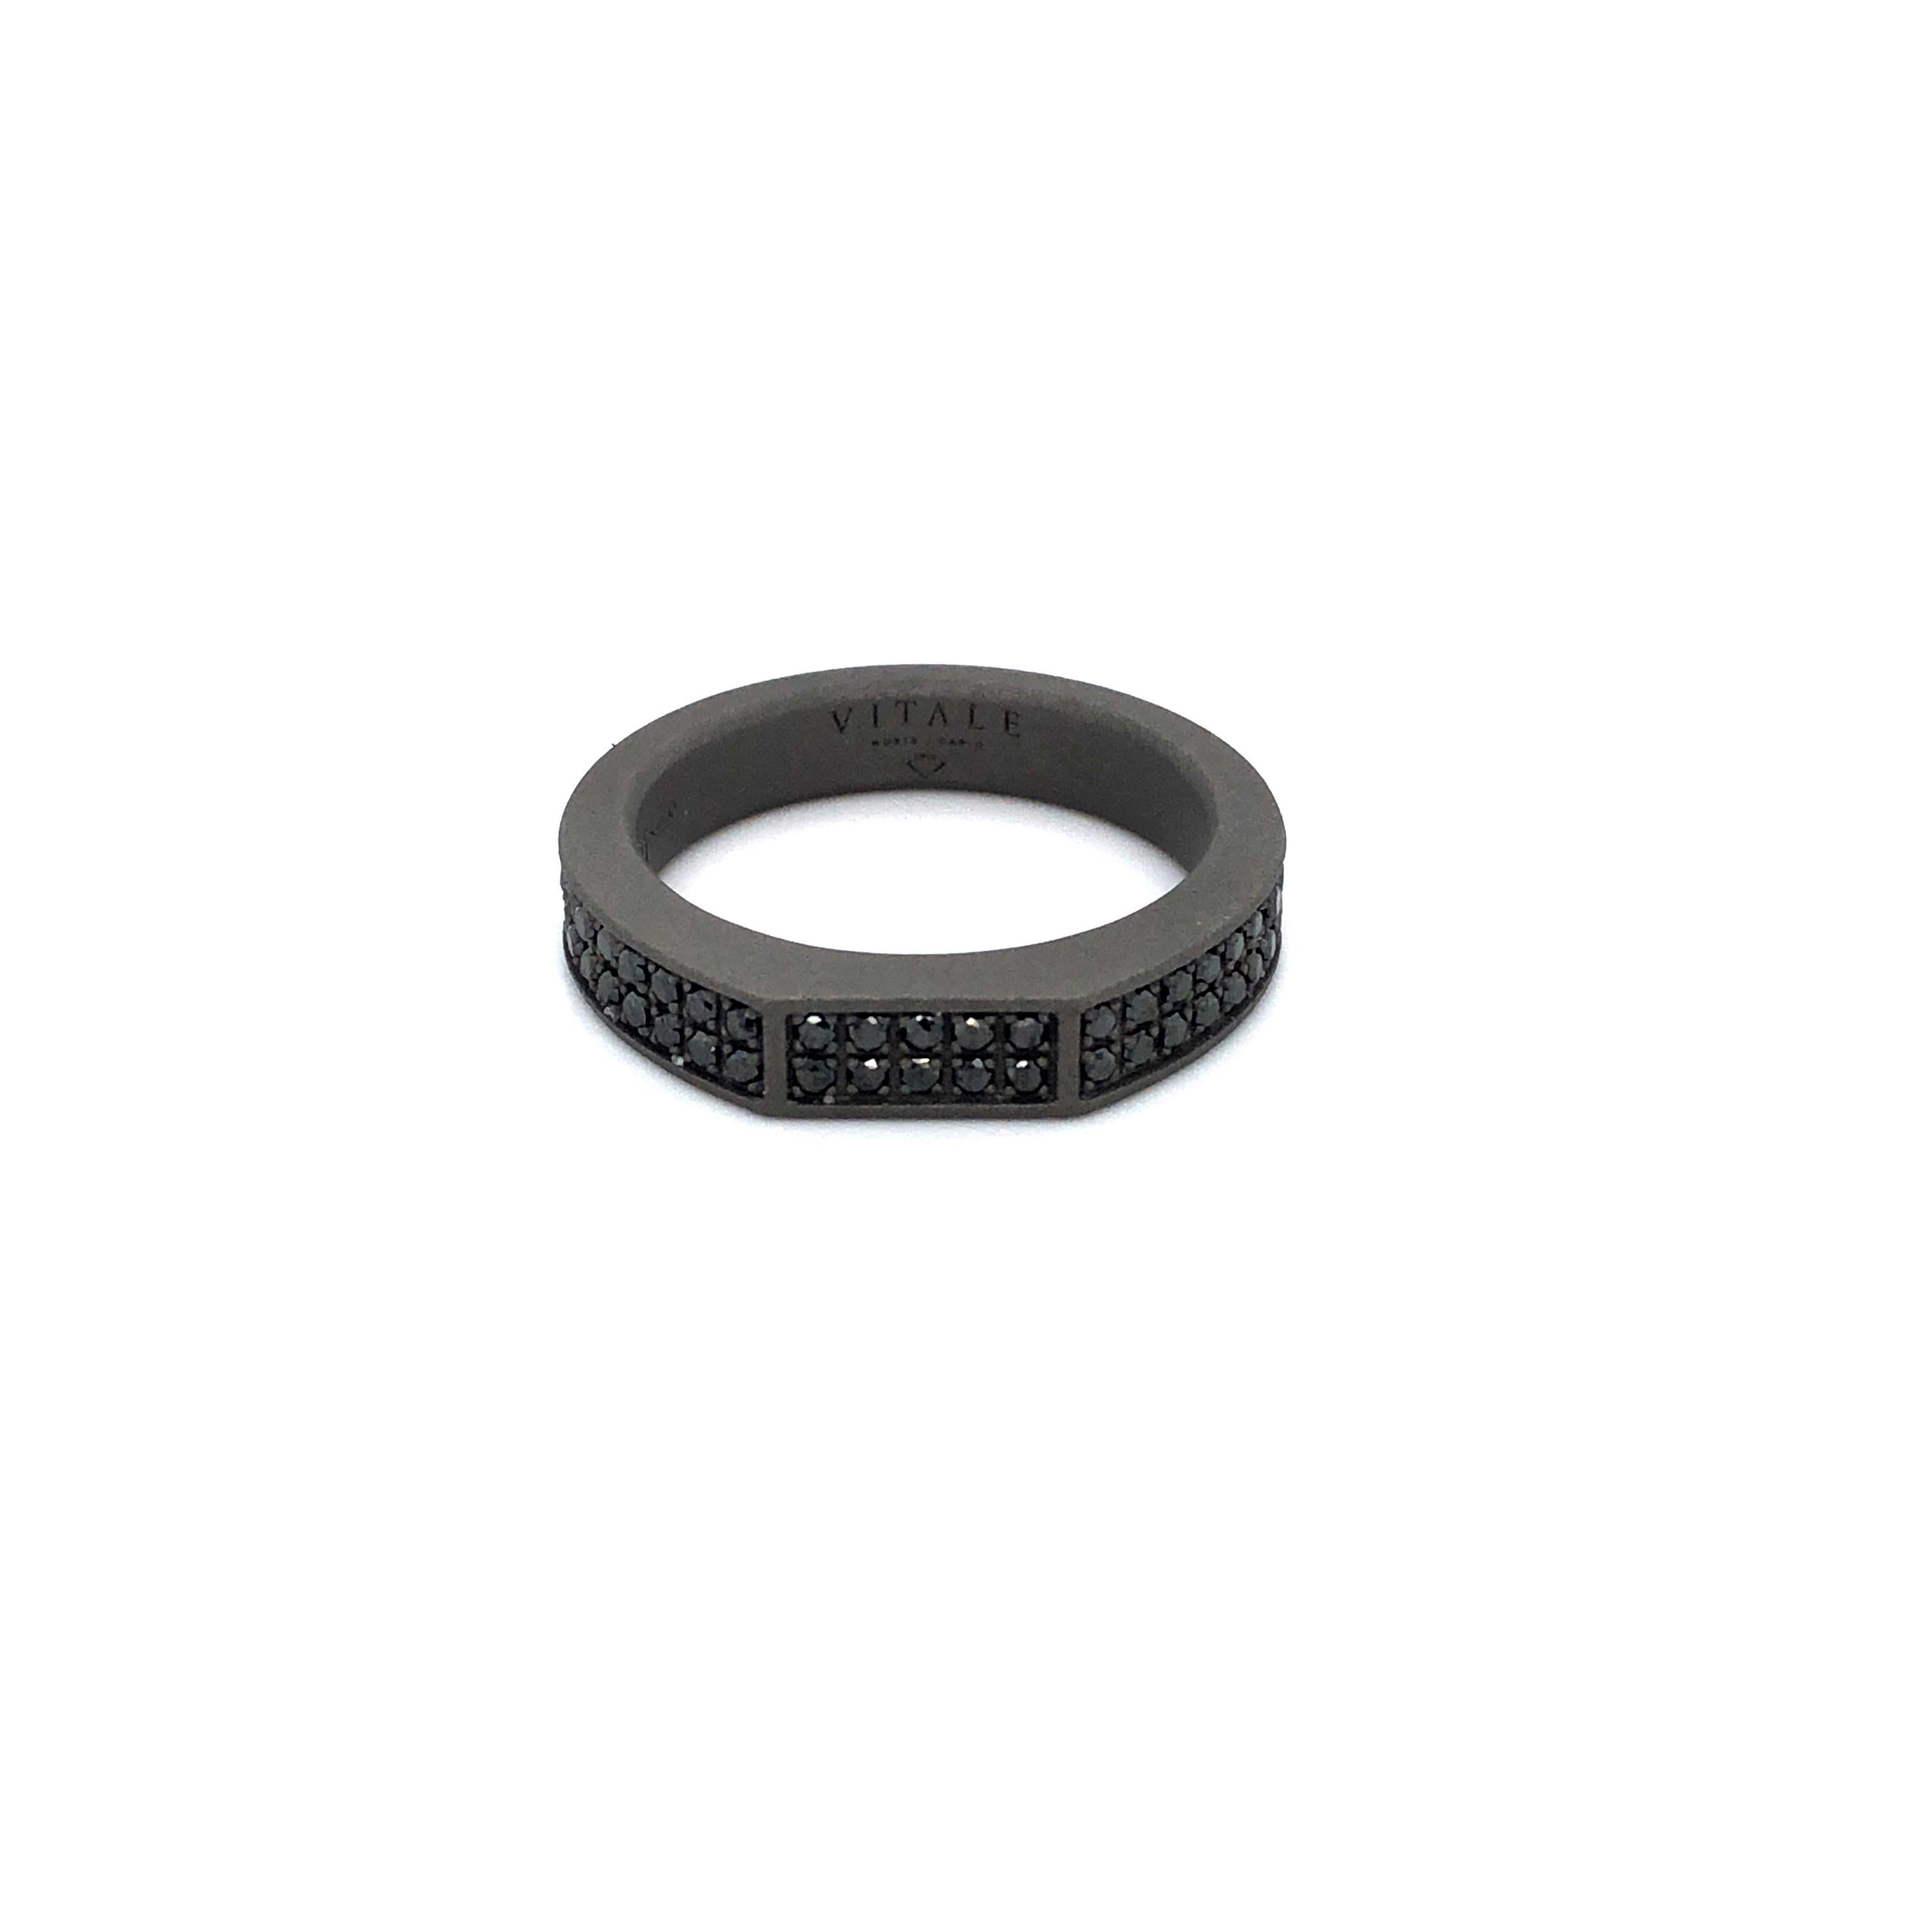 Titanium band ring is from our Men's Collection. This masculine stylish ring is made of 90 natural black round diamonds in total of 0.9 Carat that are placed along the band. The band is 0.5cm wide. Perfect for modern look!

The men’s collection is a